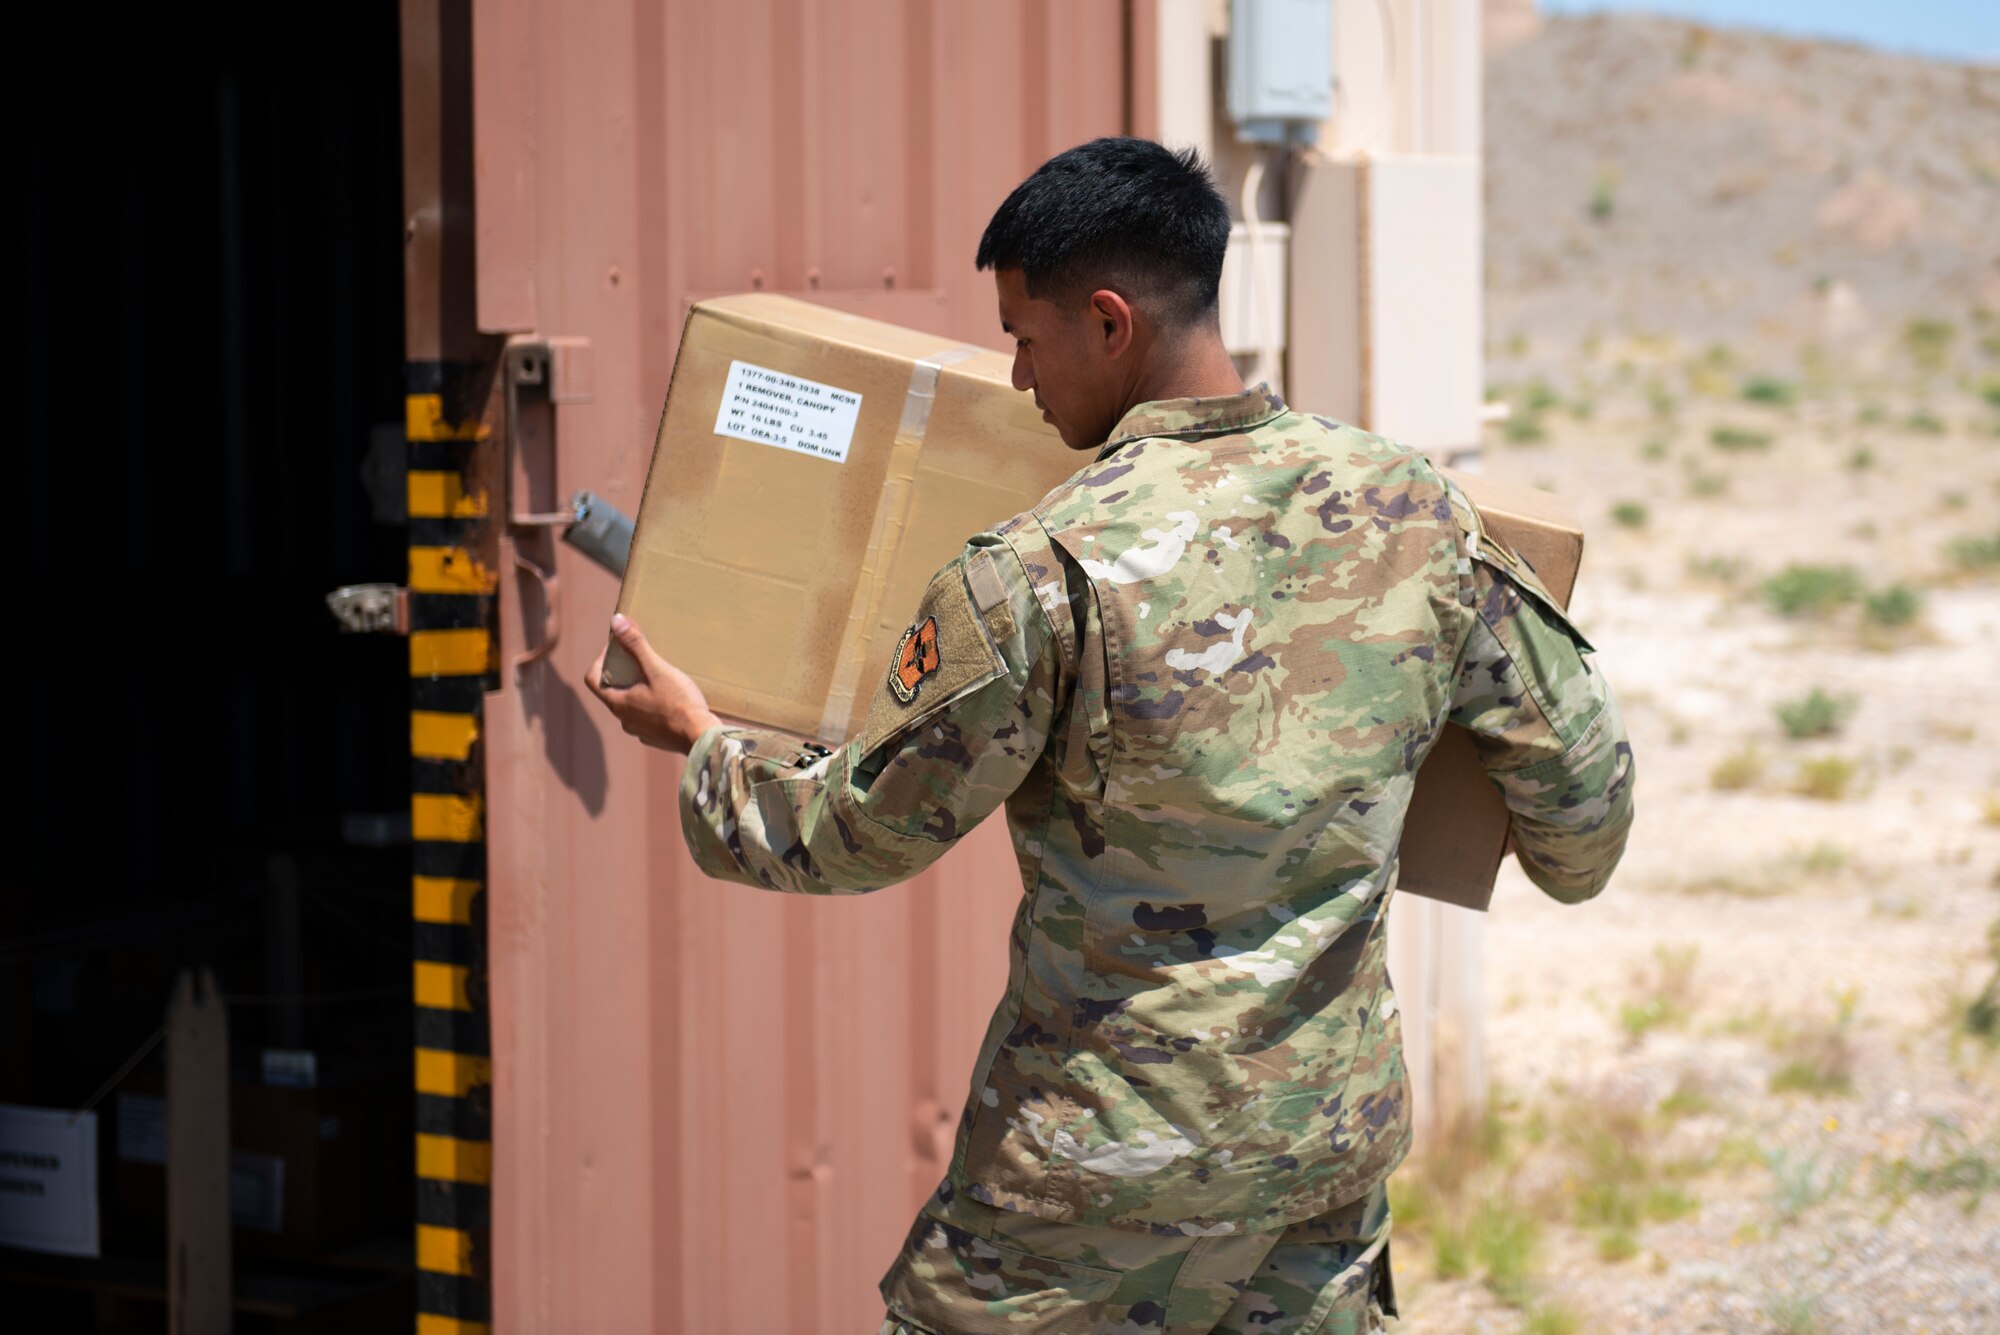 Senior Airman Alfred Martinez, 49th Equipment Maintenance Squadron munitions storage crew chief, transports supplies, May 18, 2022, on Holloman Air Force Base, New Mexico.